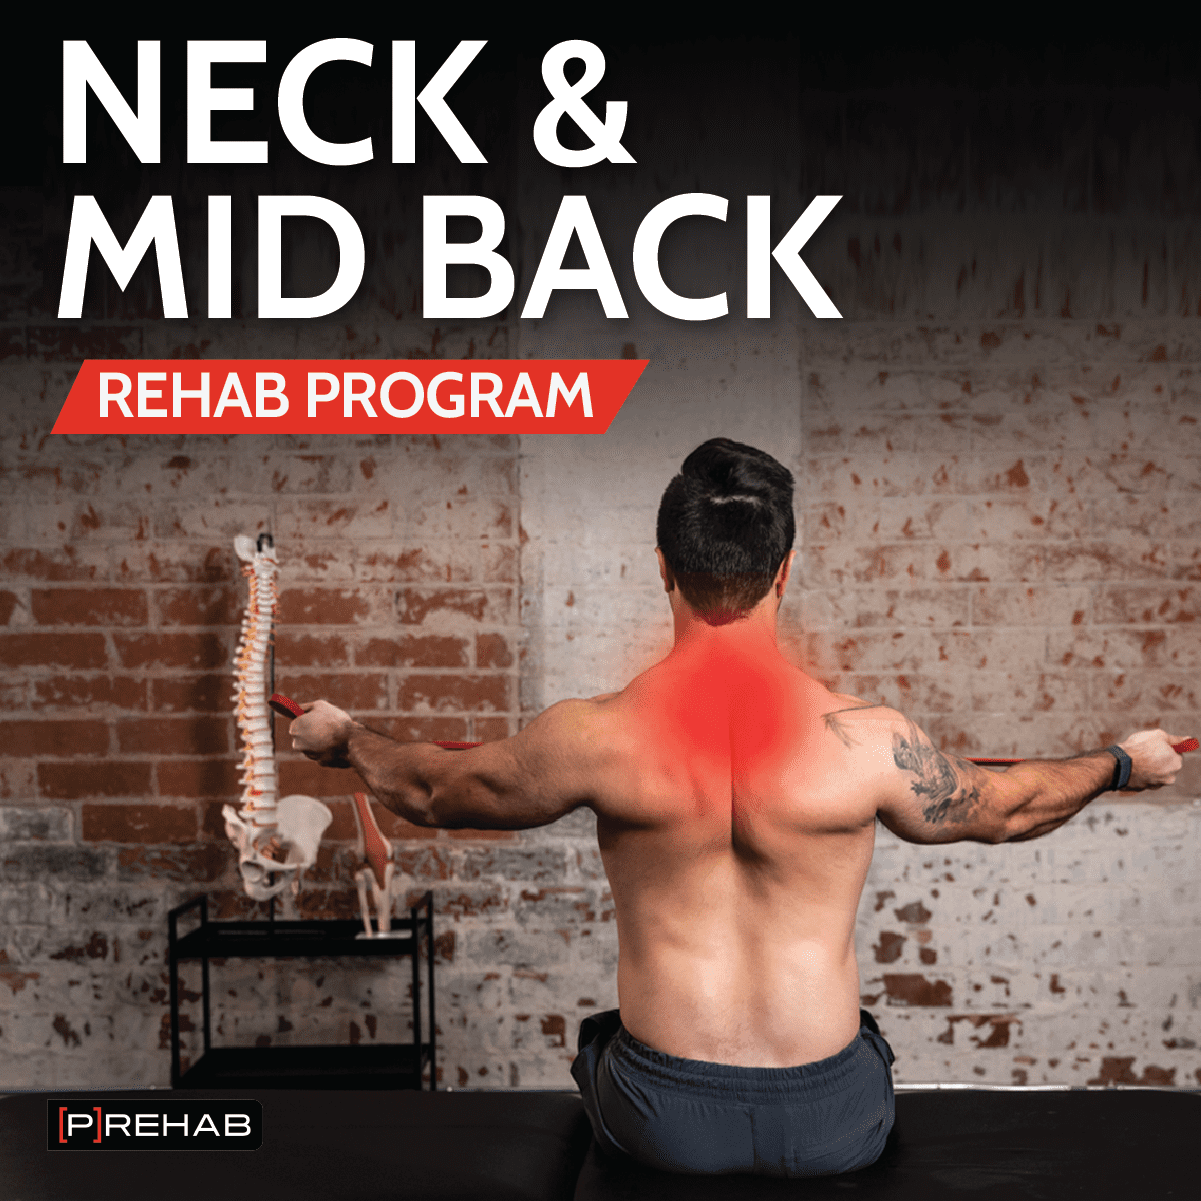 Neck & Mid Back Rehab Program, Online Physical Therapy